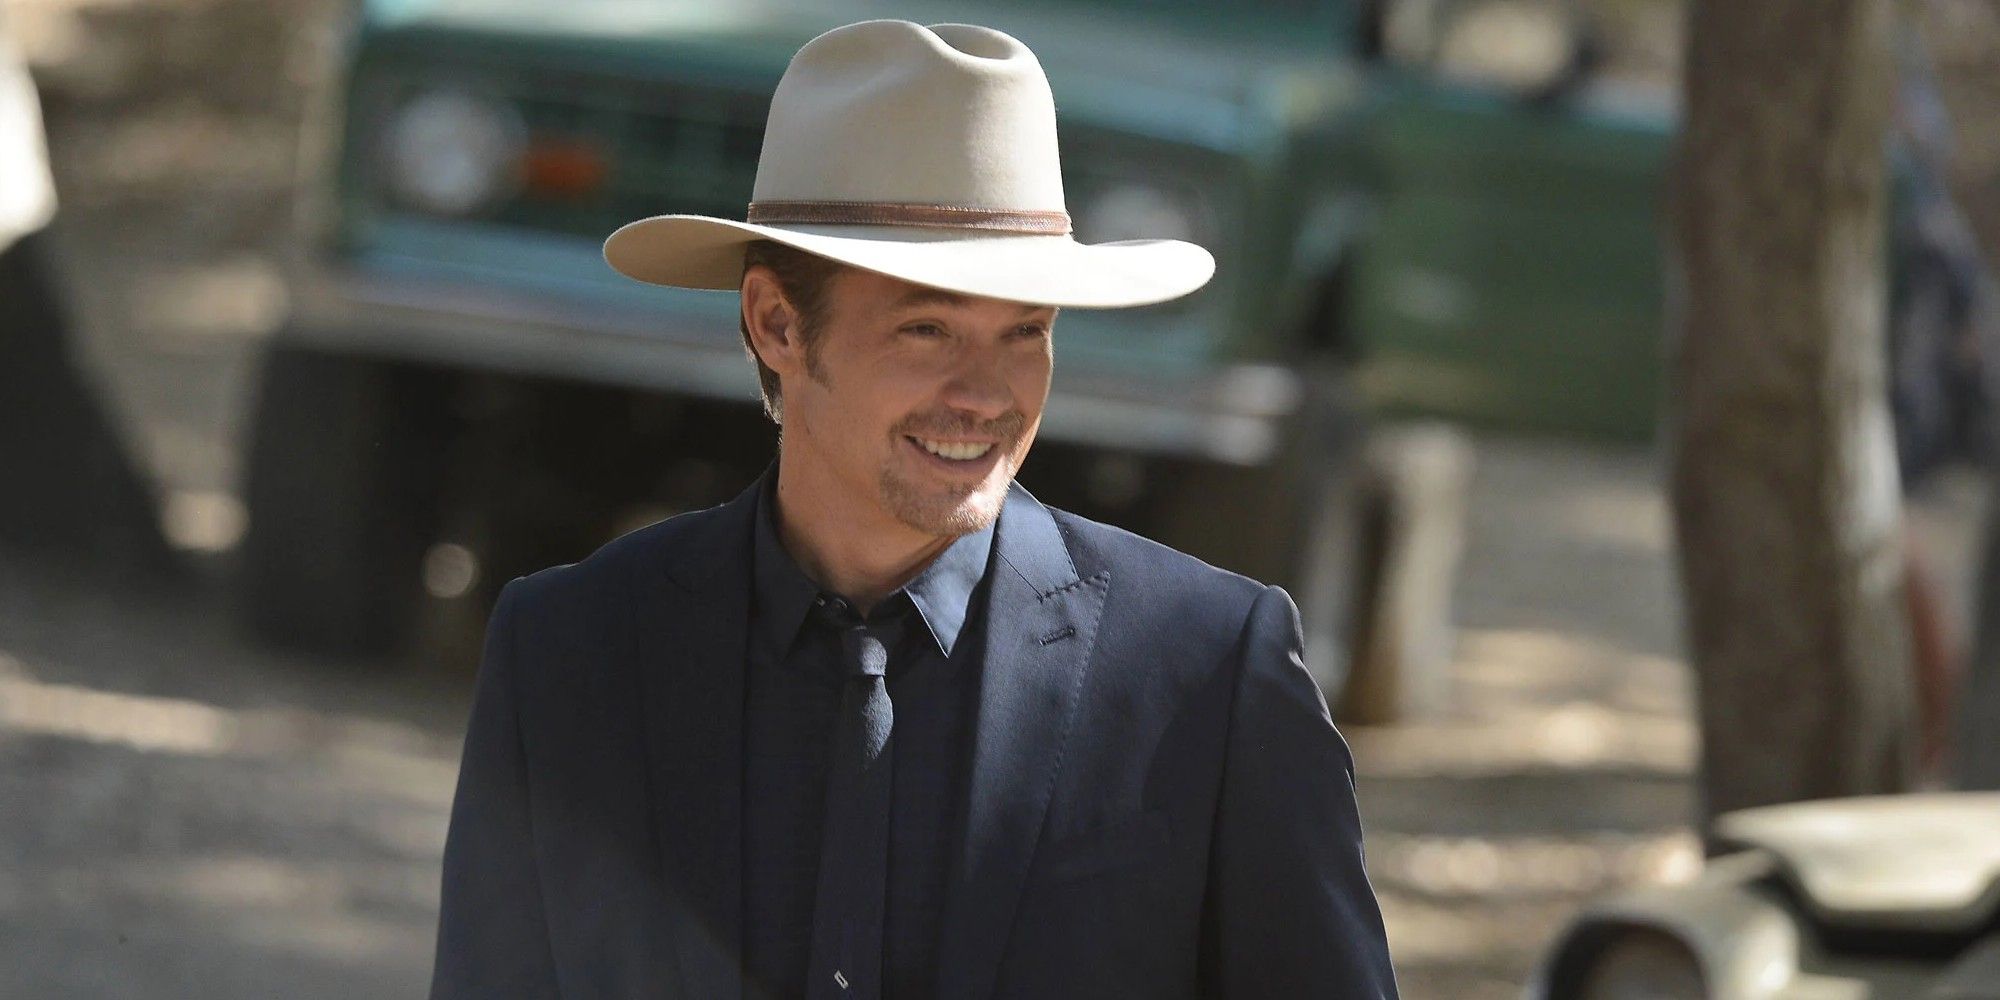 Justified Timothy Olyphant as Raylan Givens